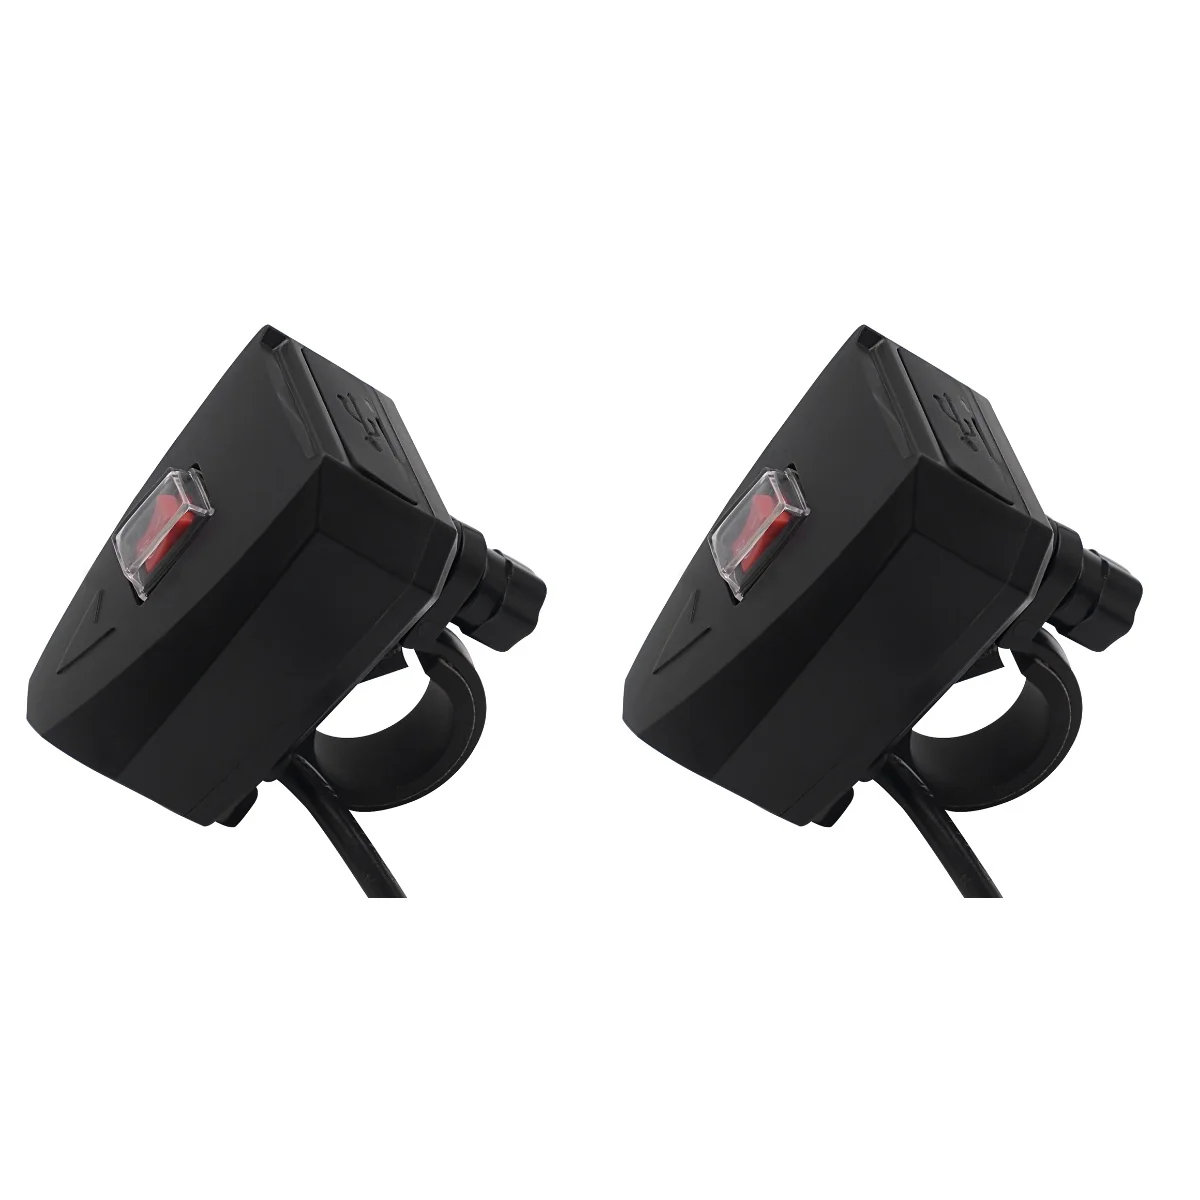 

2pcs Motorcycle Mobile Phone Waterproof Dual usb Electric Car with Switch 12v-80v Handlebar Installation (Black)